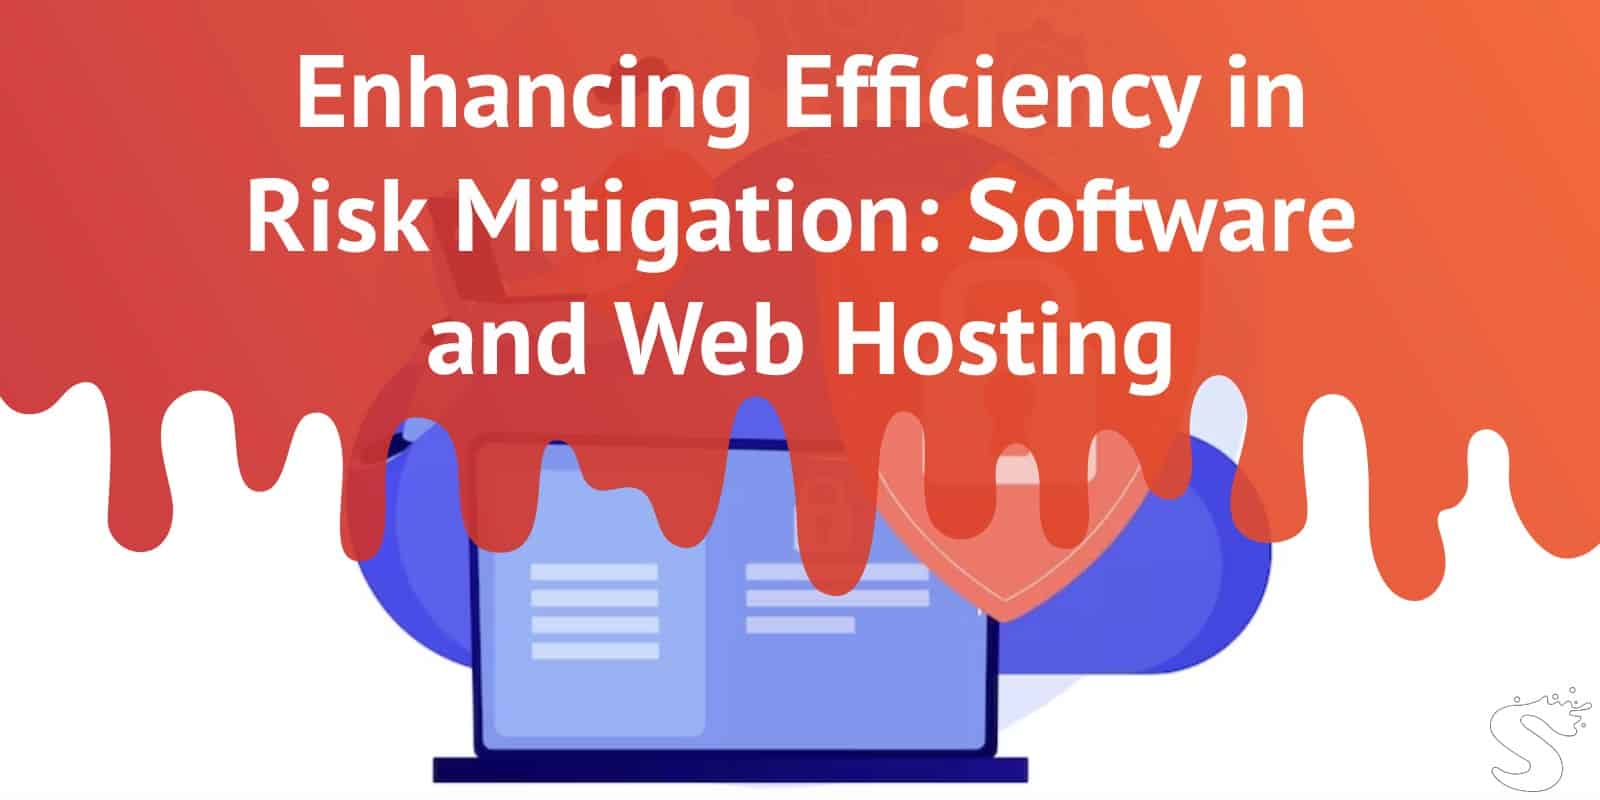 Enhancing Efficiency in Risk Mitigation: Software and Web Hosting